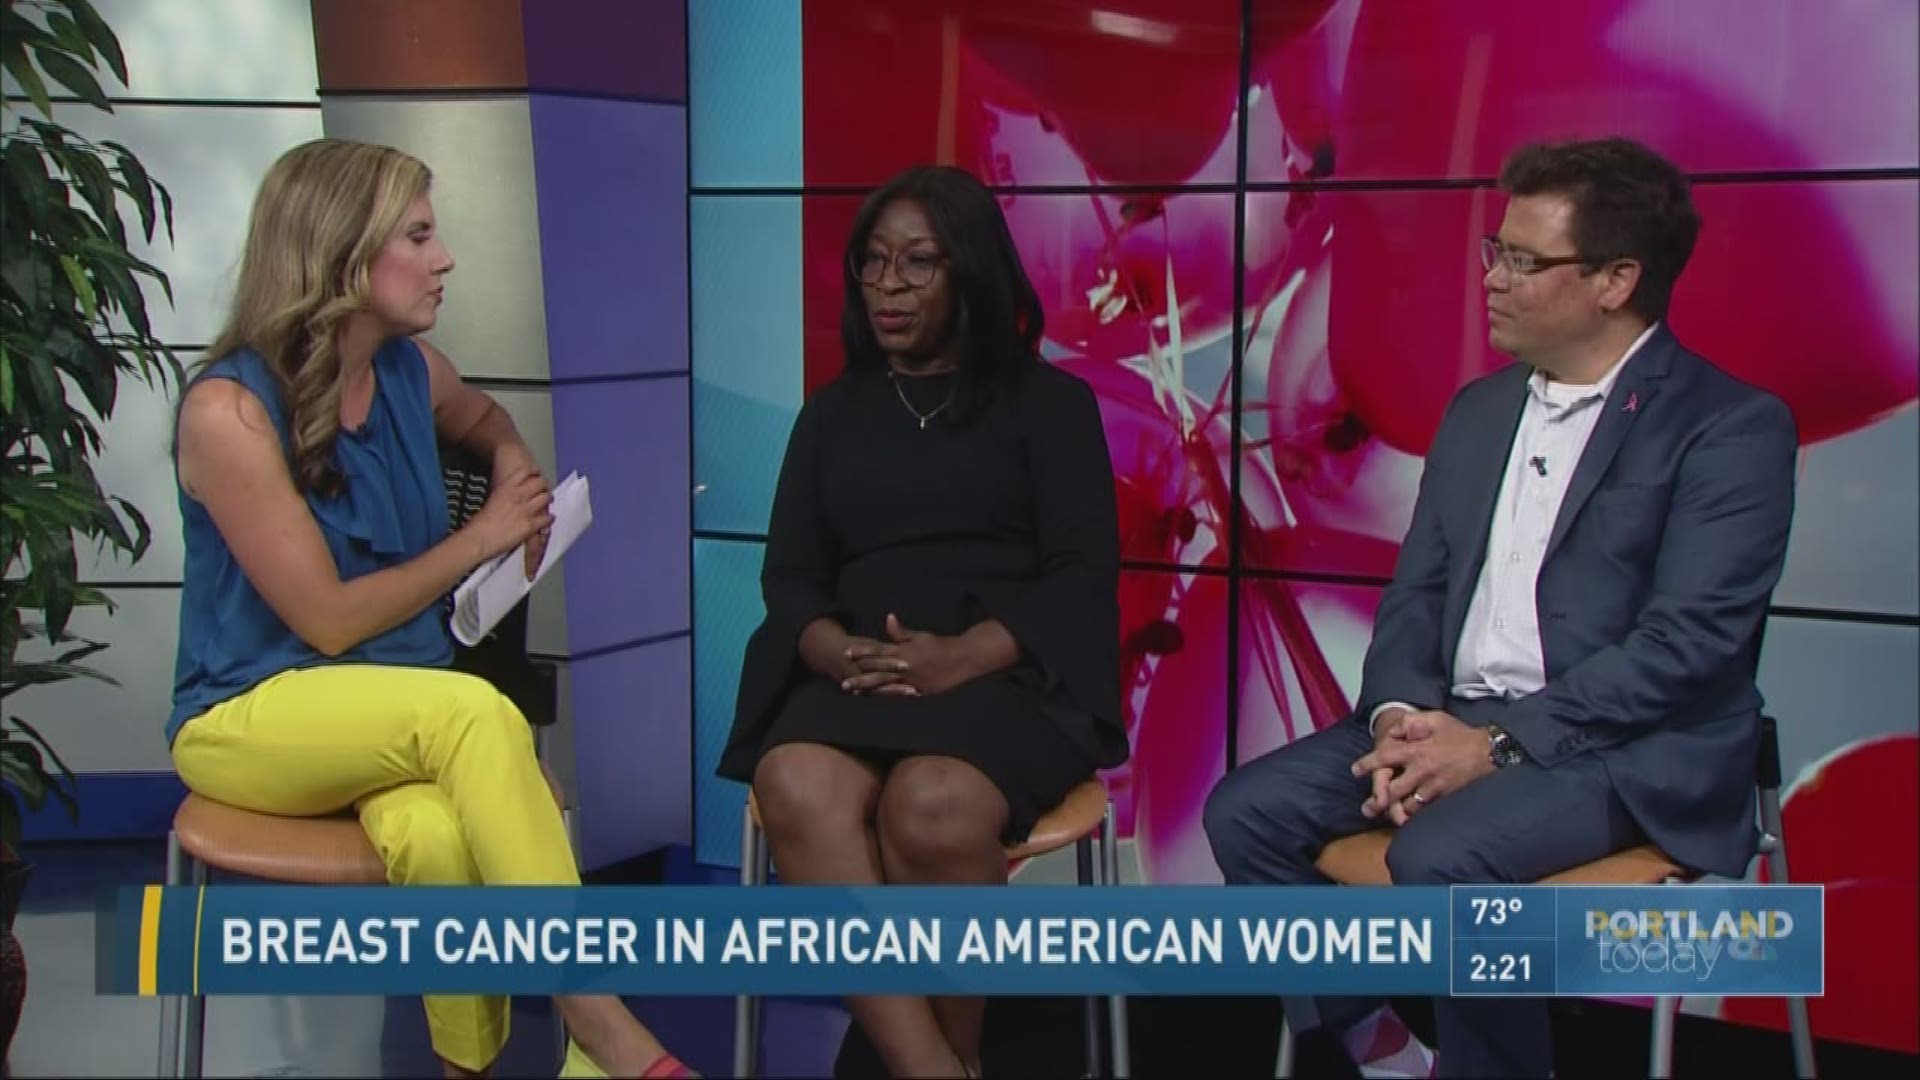 Breast cancer in African American women